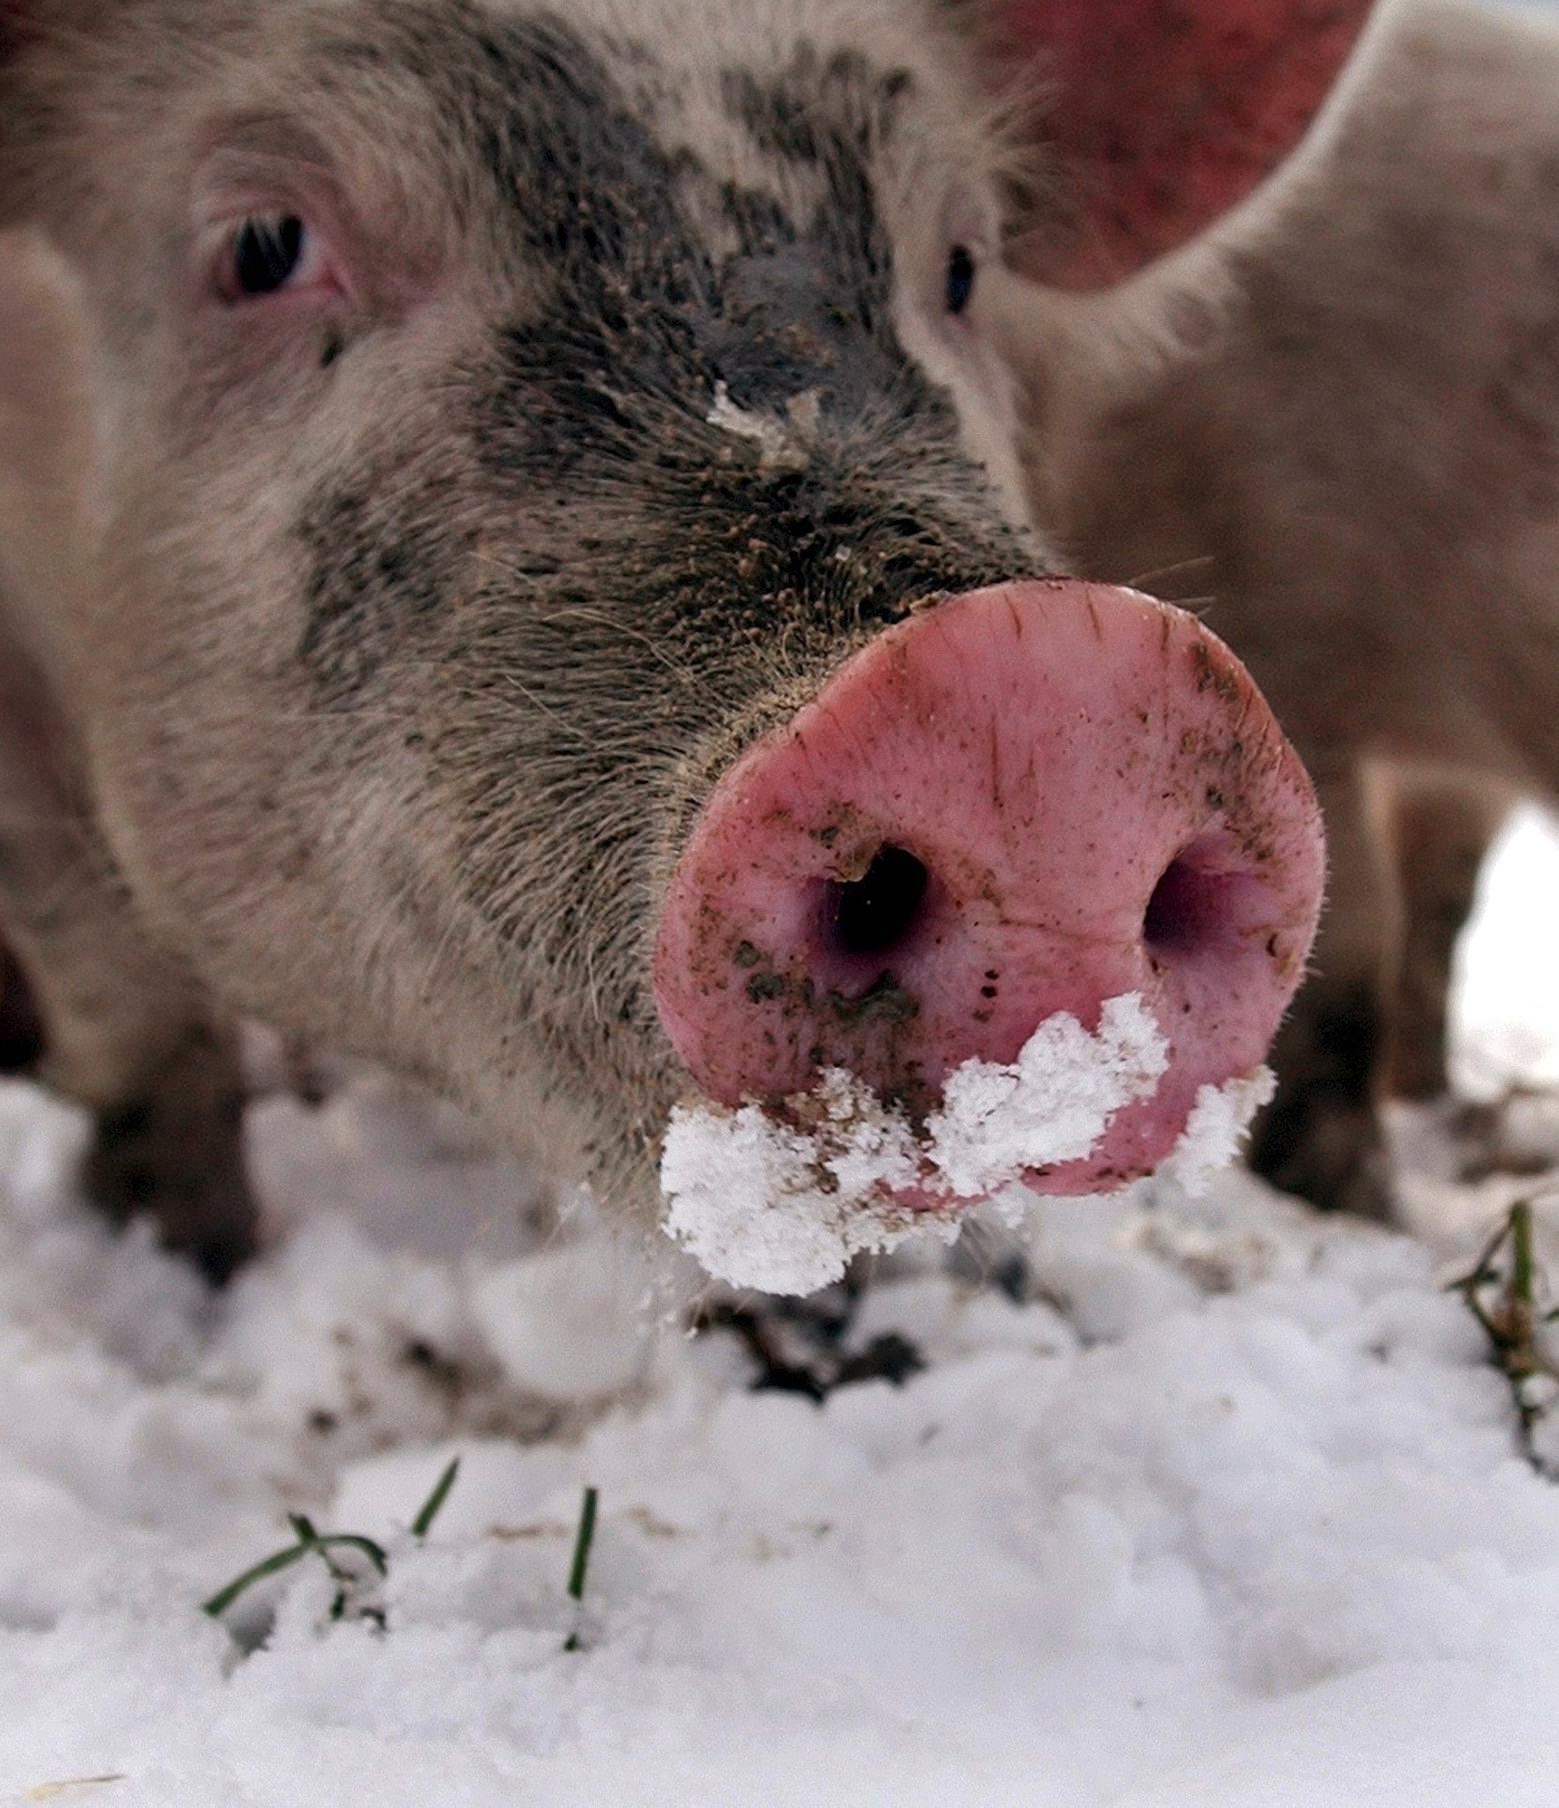 A pig in search for food frolics in the snow in its open air enclosure in the Swiss village of Trimmis, Wednesday, December 17, 2003. (KEYSTONE/Eddy Risch) SWITZERLAND PIGS SNOW